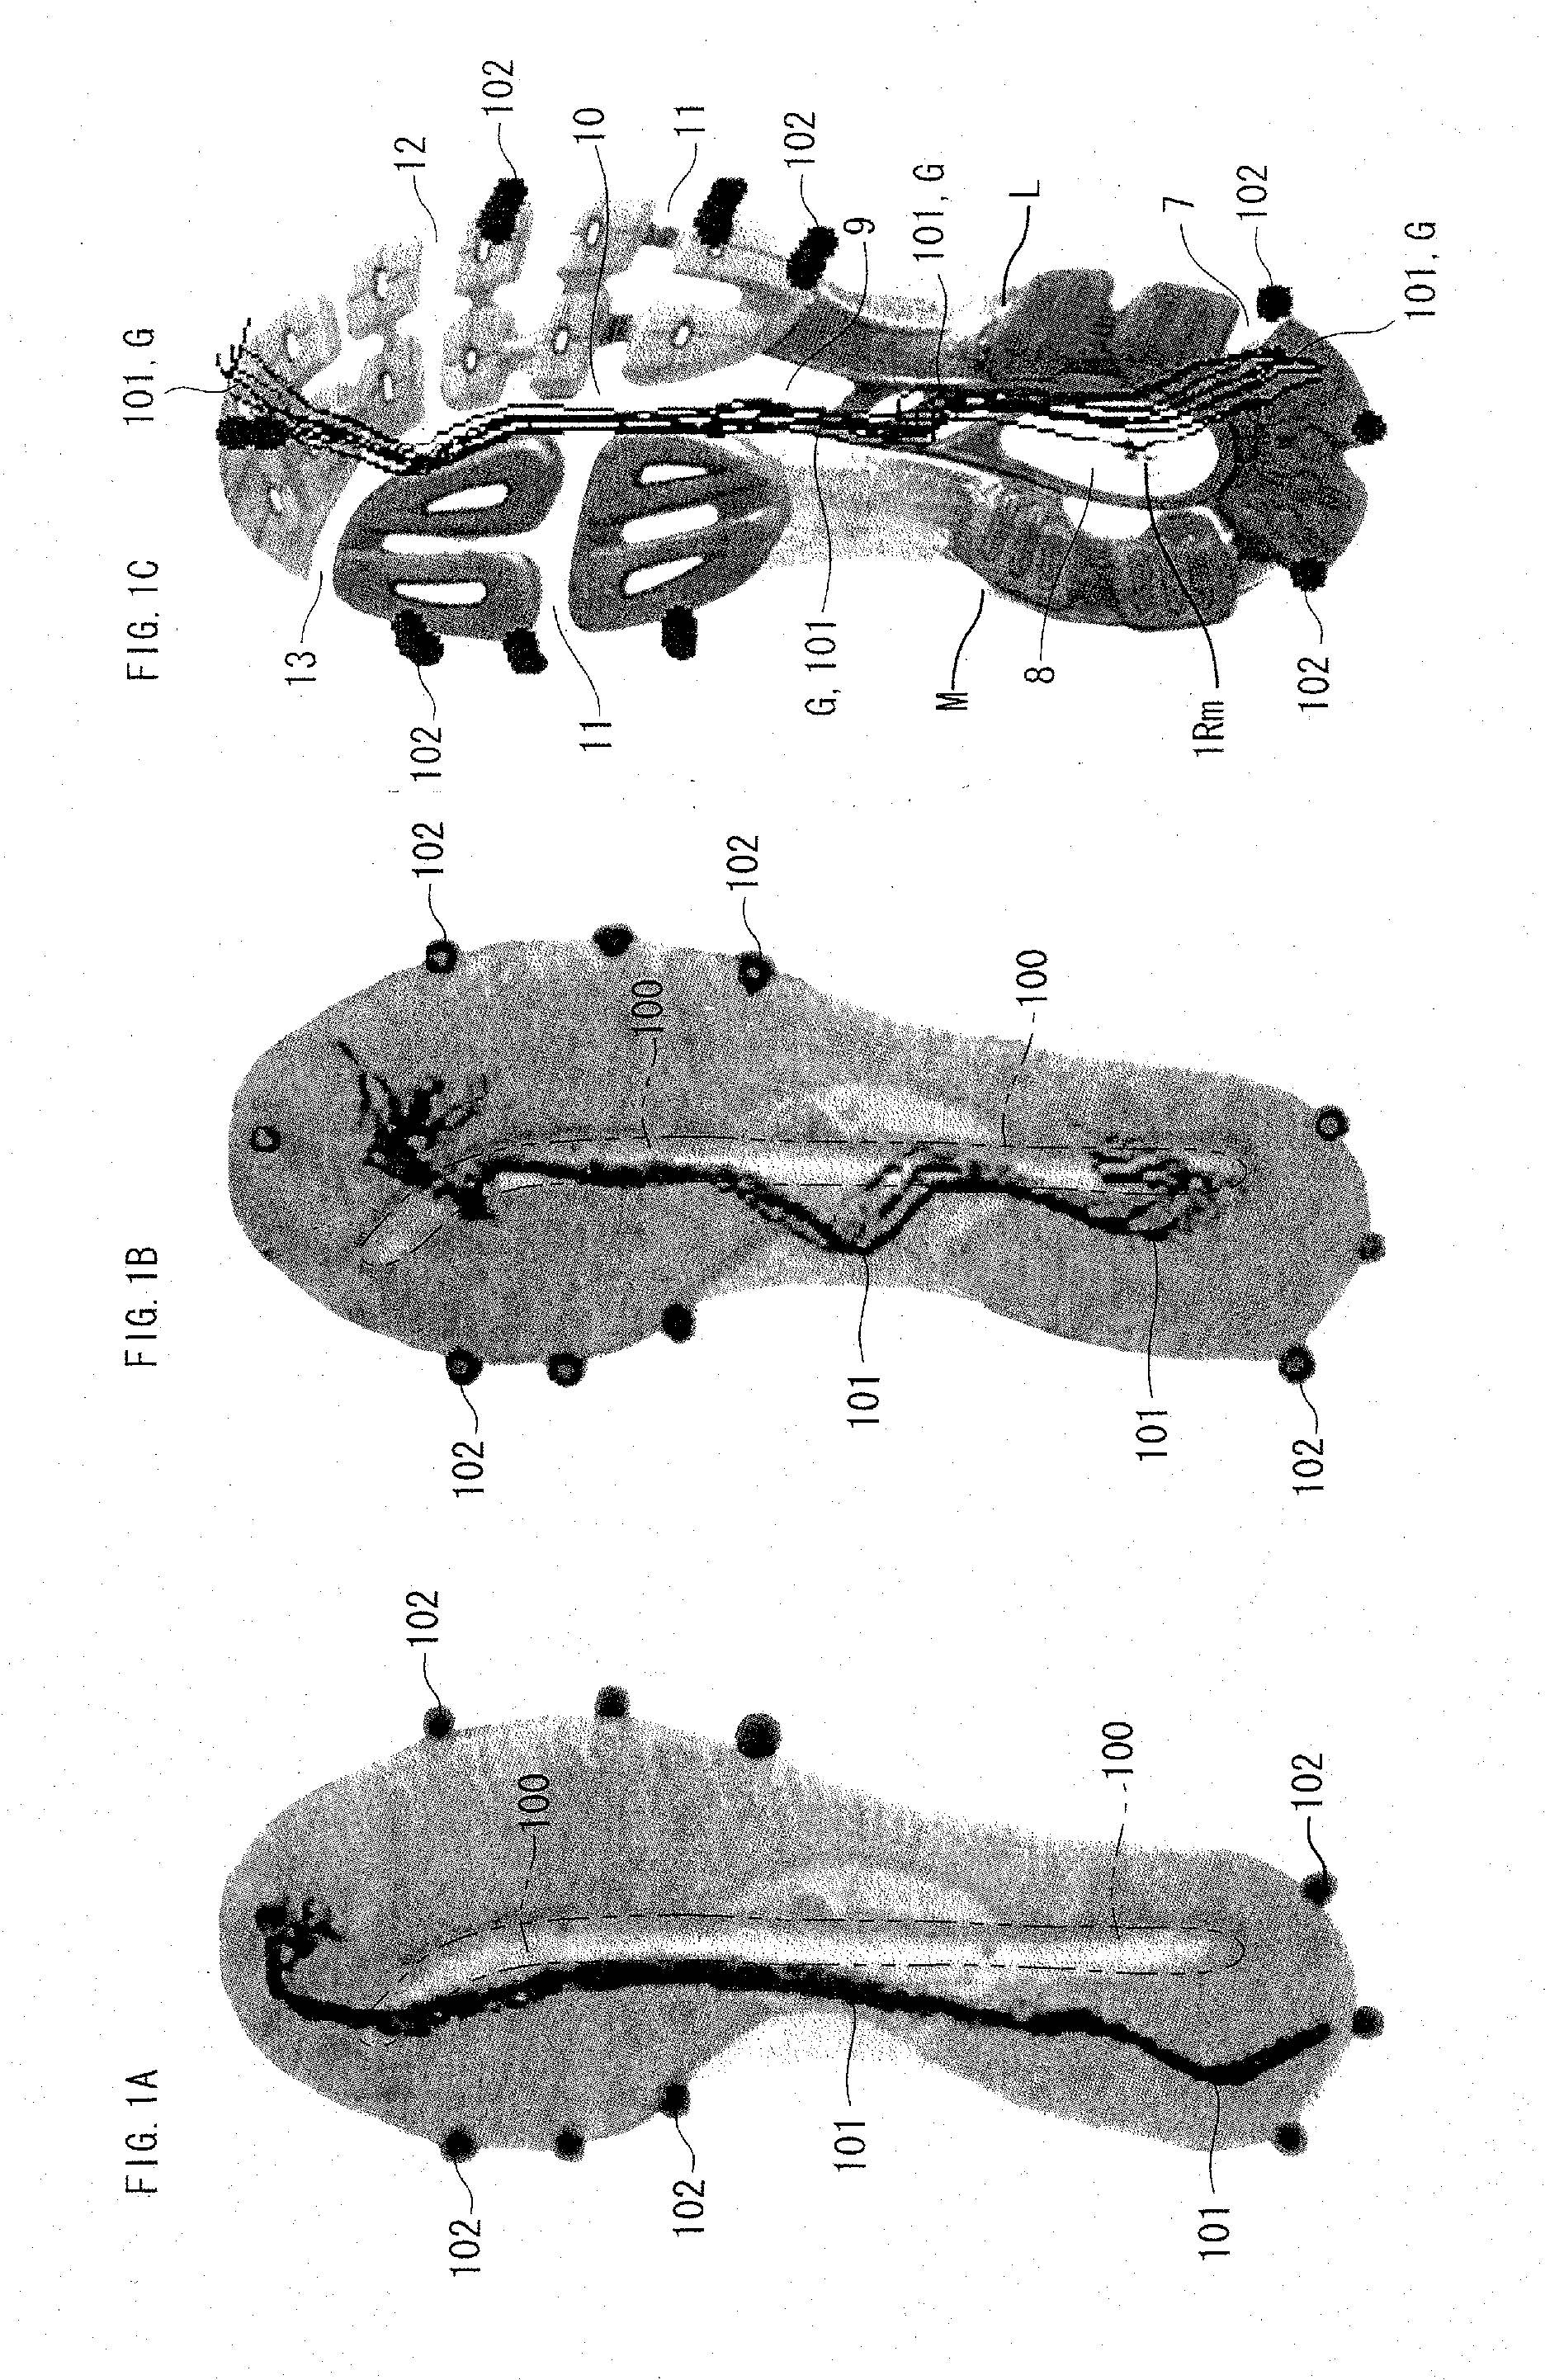 Shoe sole of athletic shoe with high running efficiency